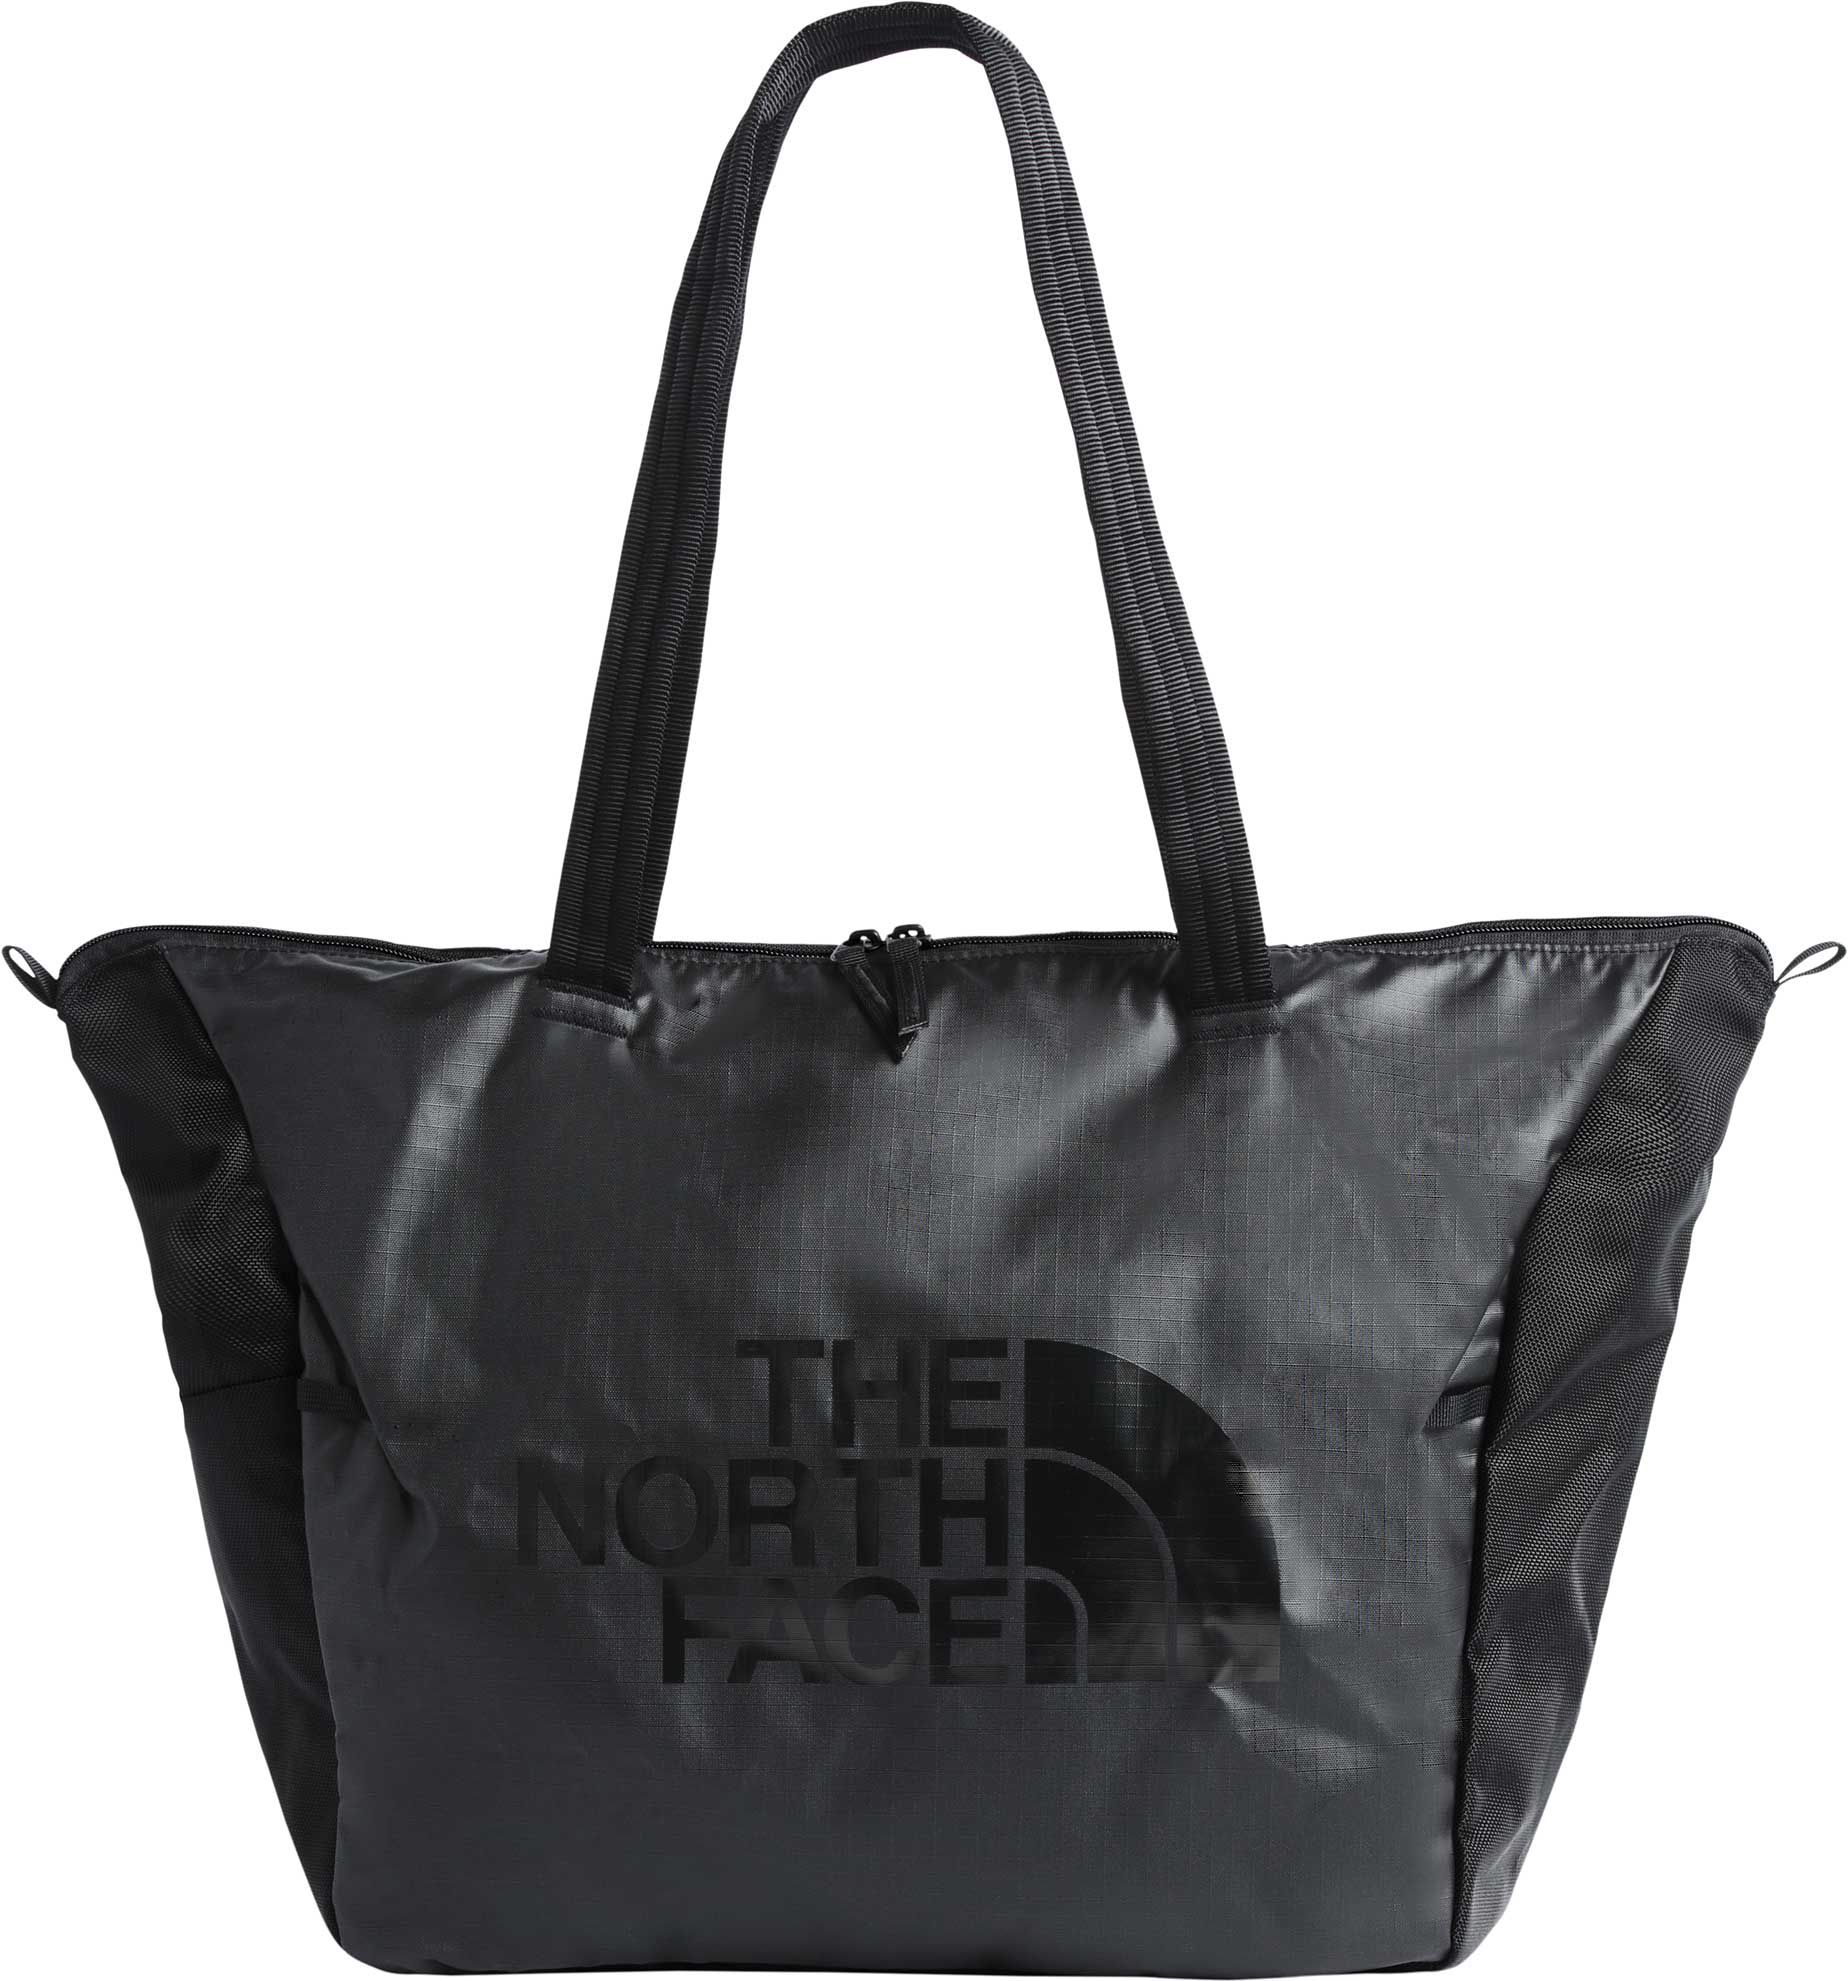 north face stratoliner large